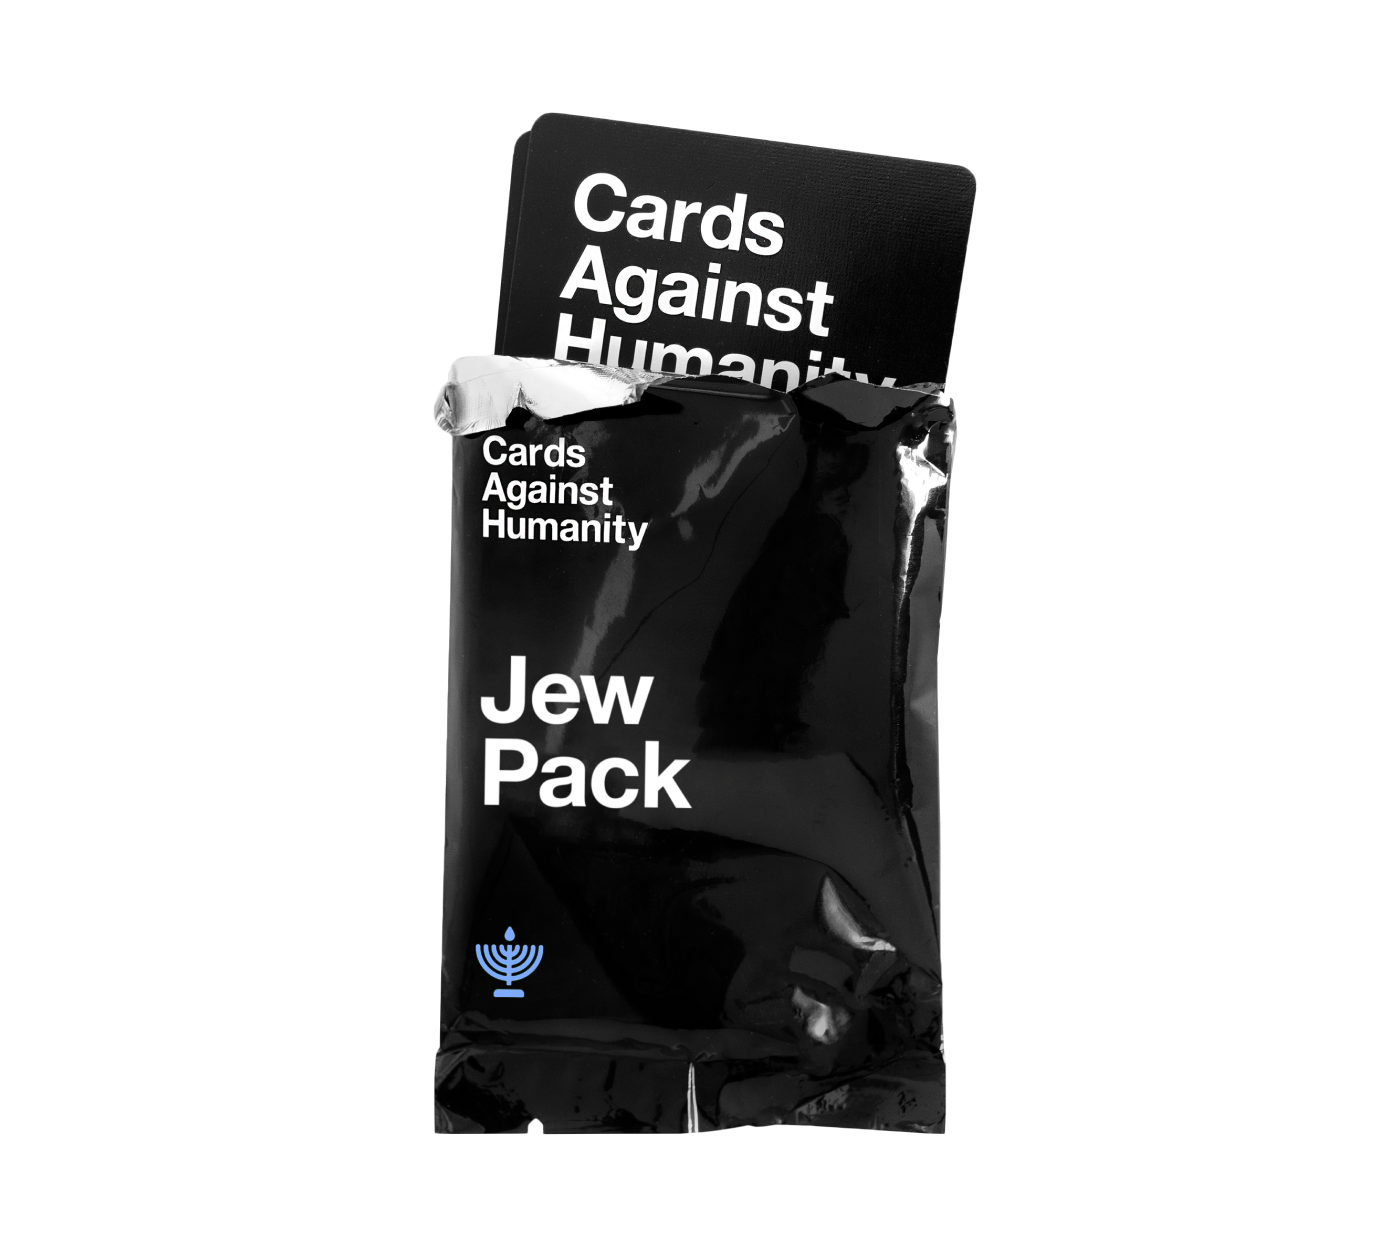 Jew Pack Cards Against Humanity Expansion Set New Great Stocking Stuffer 